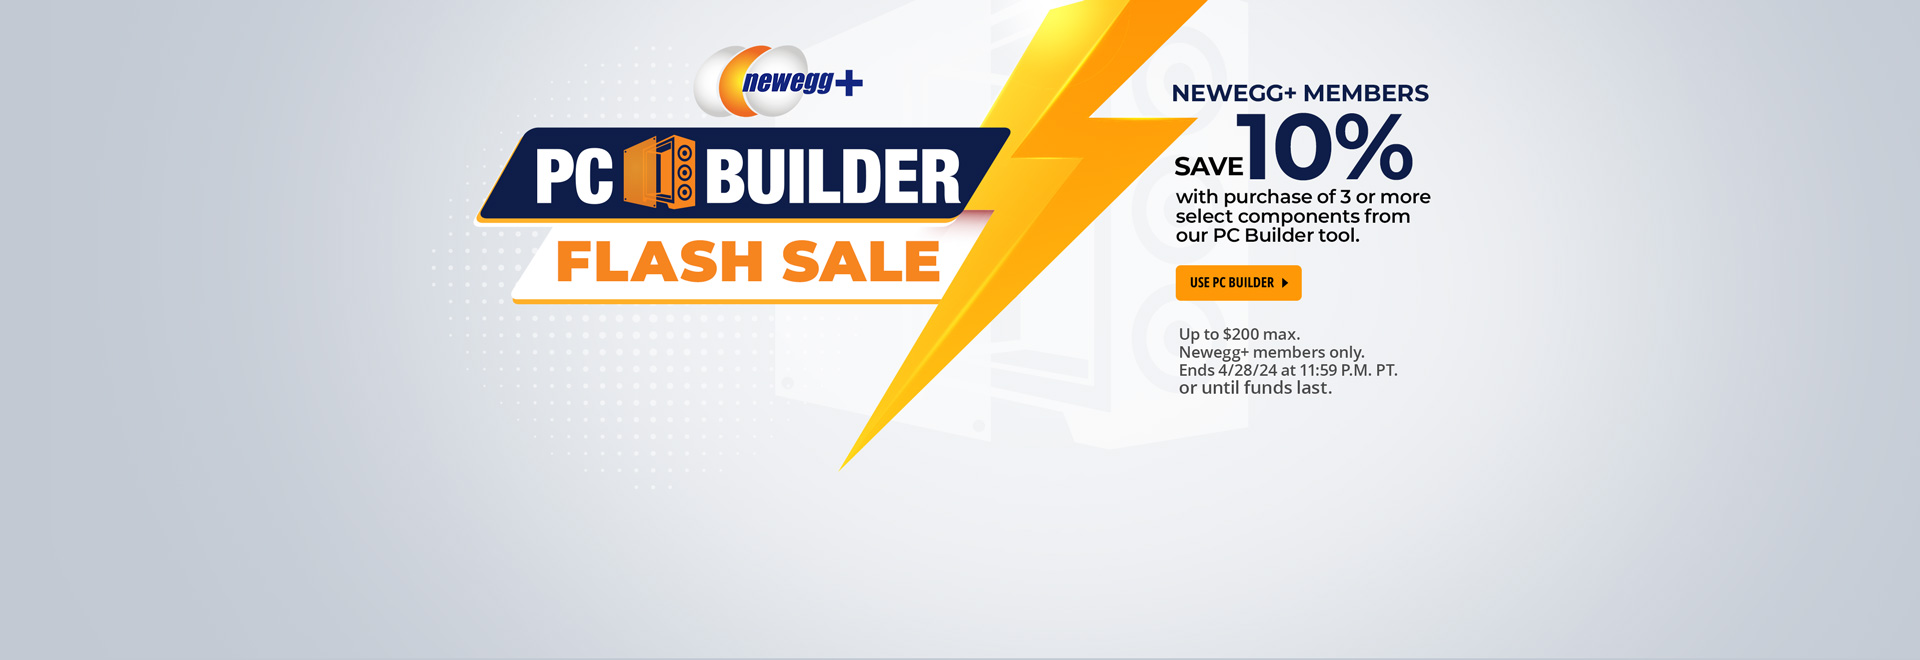 newegg.com - Newegg plus PC Builder Flash Sale – Avail Buy 3 or more Get 10% OFF